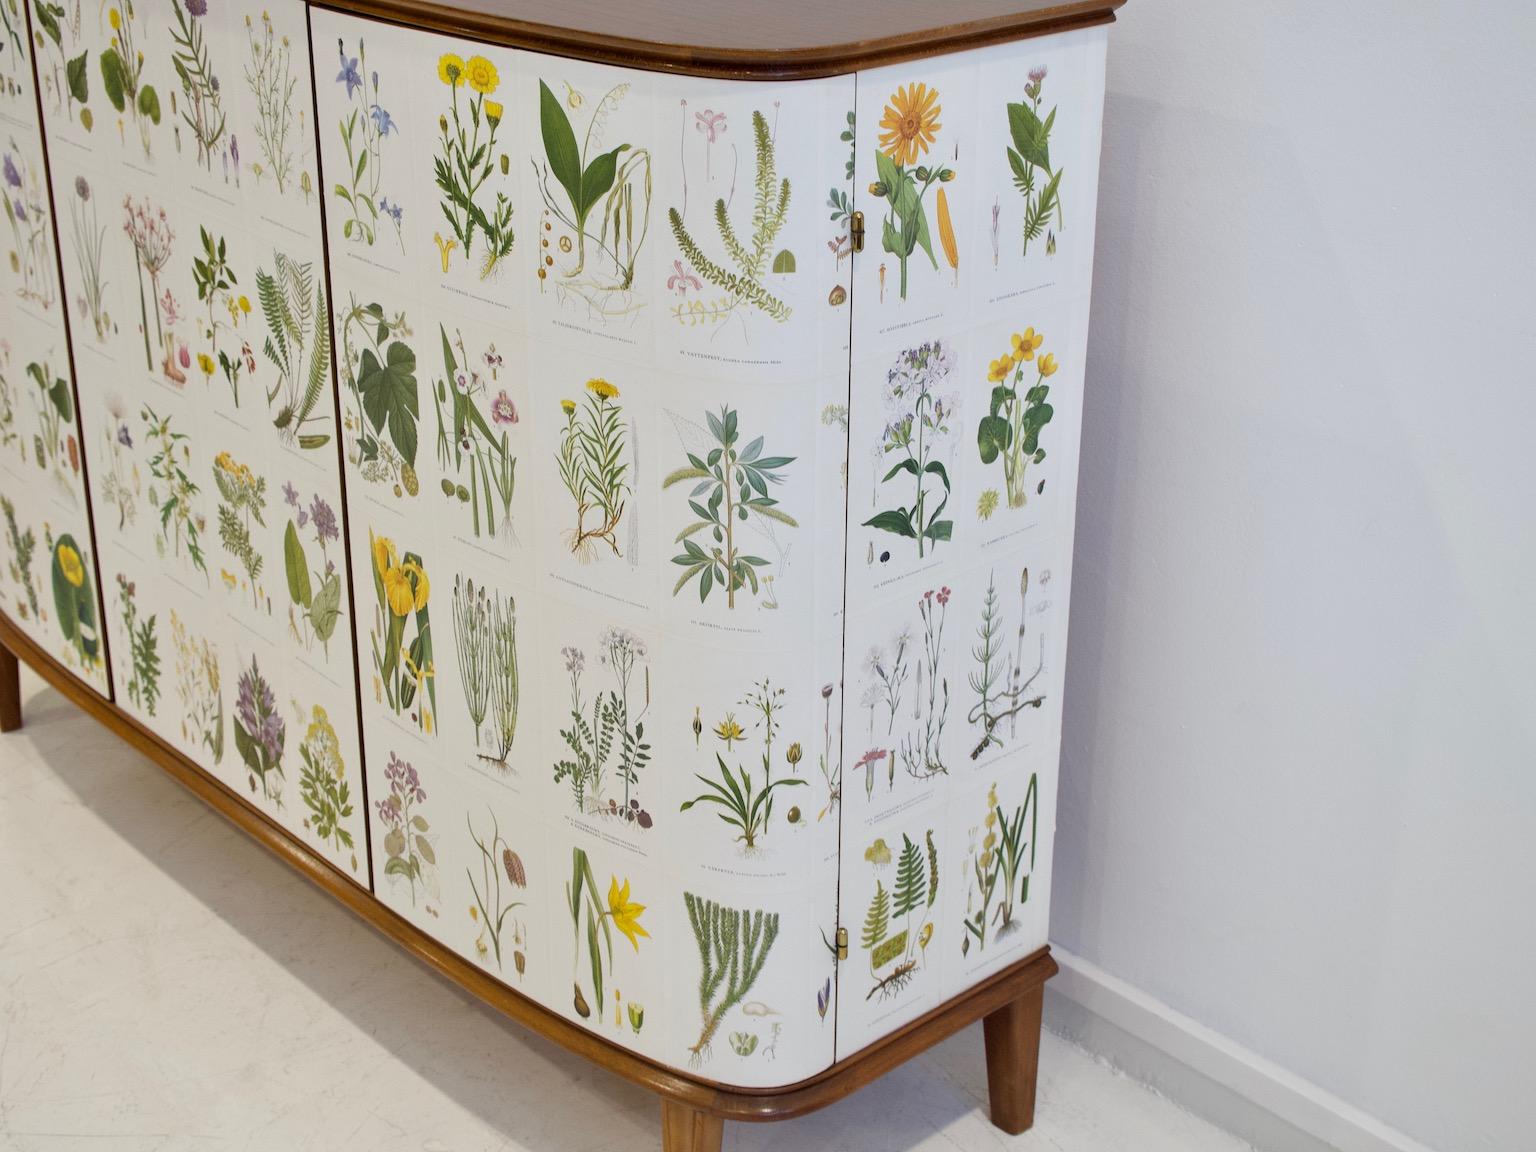 Mid-20th Century Cabinet with Nordens Flora Illustrations by C. Lindman 11